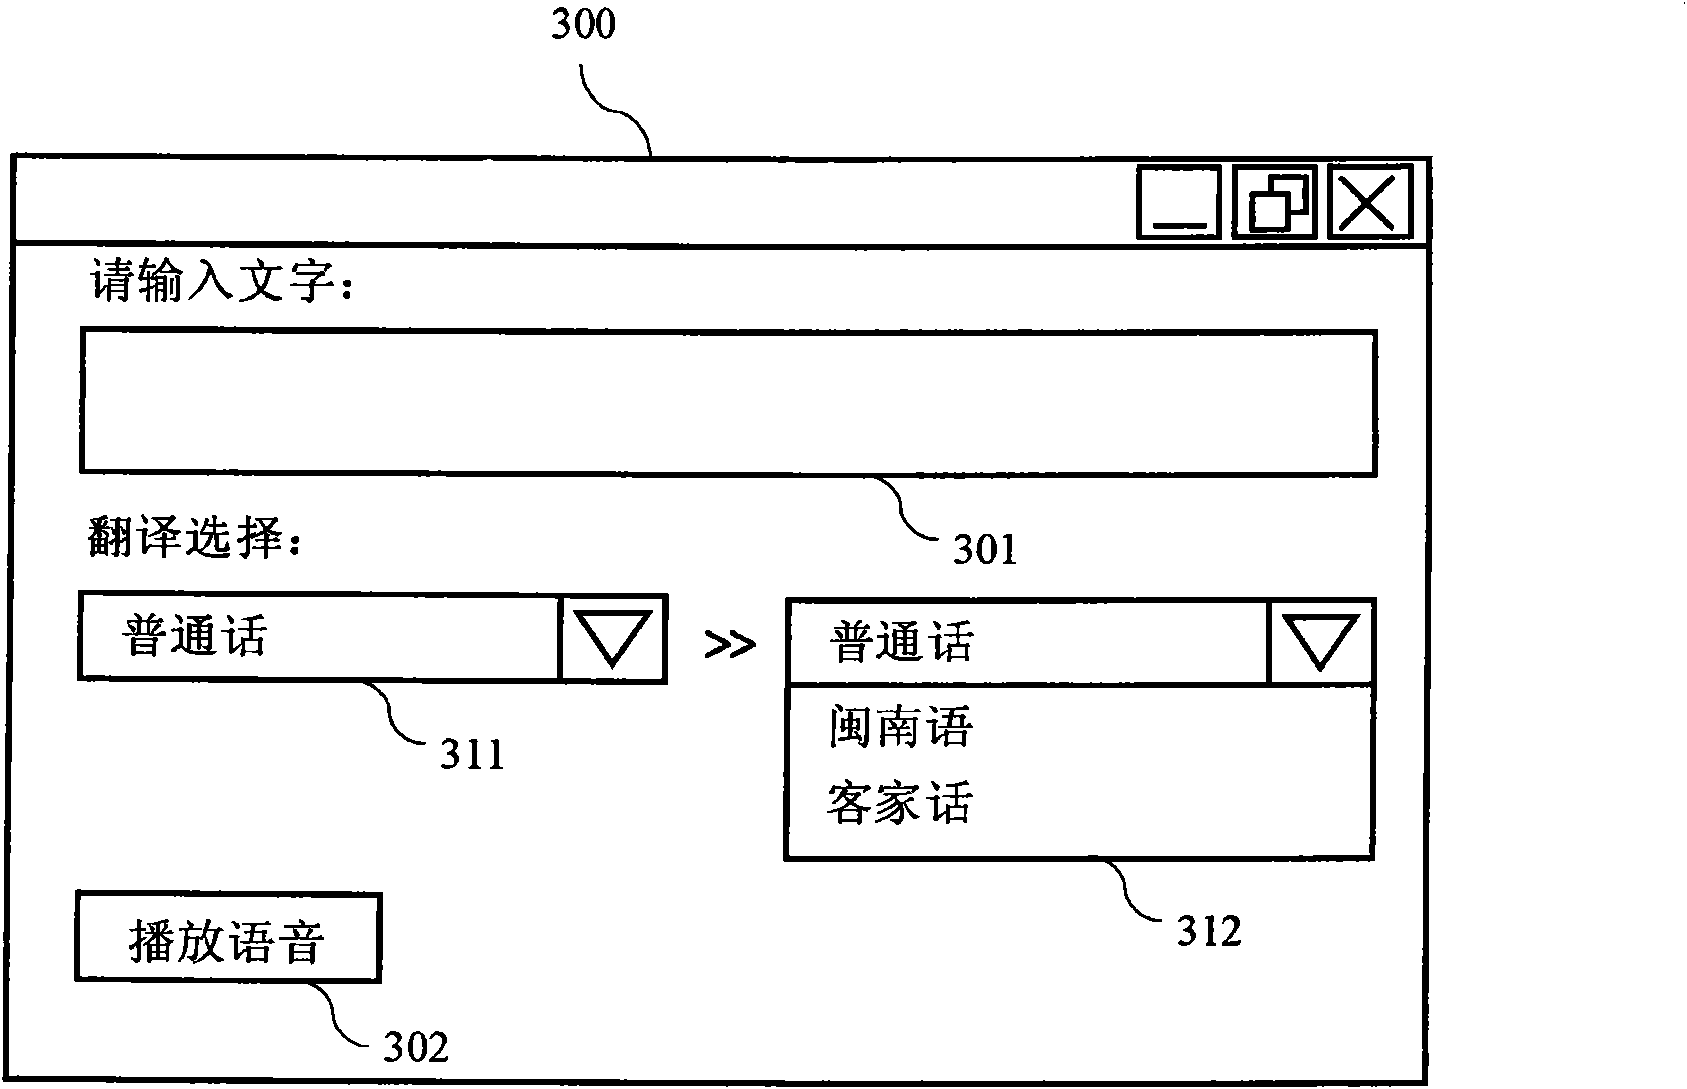 Speech translation system between Mandarin and various dialects and method thereof